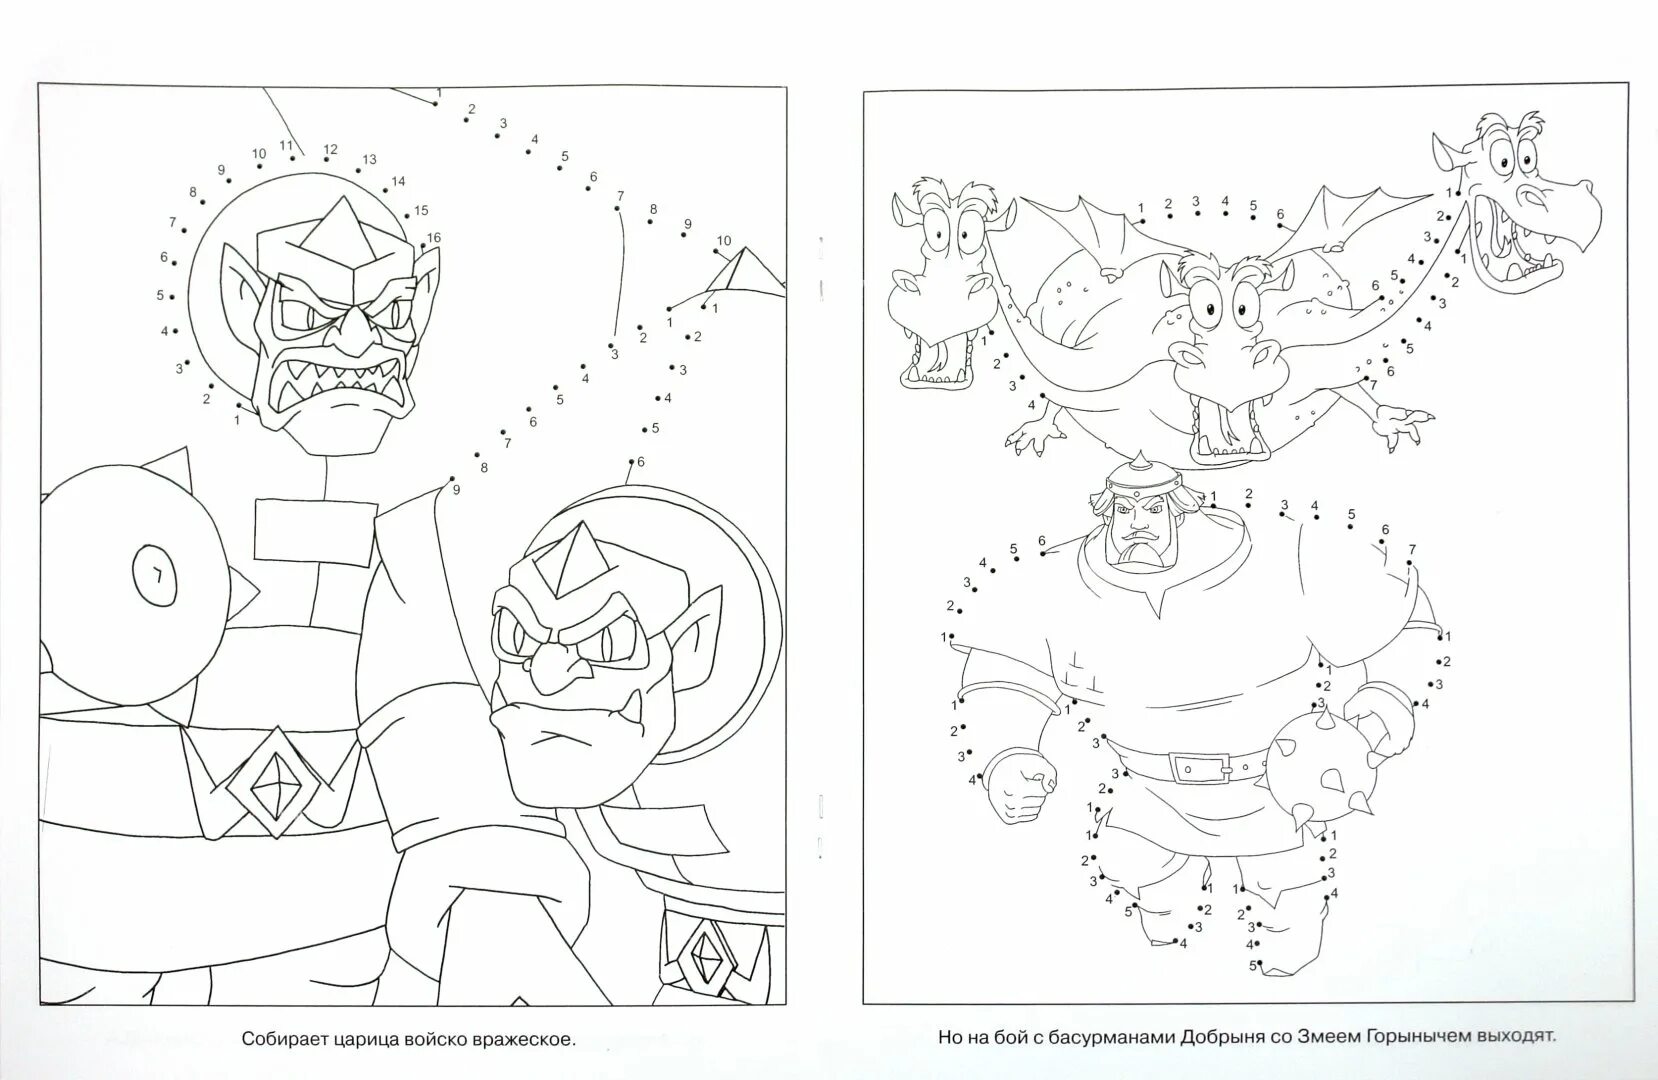 Exciting coloring page 3 game heroes